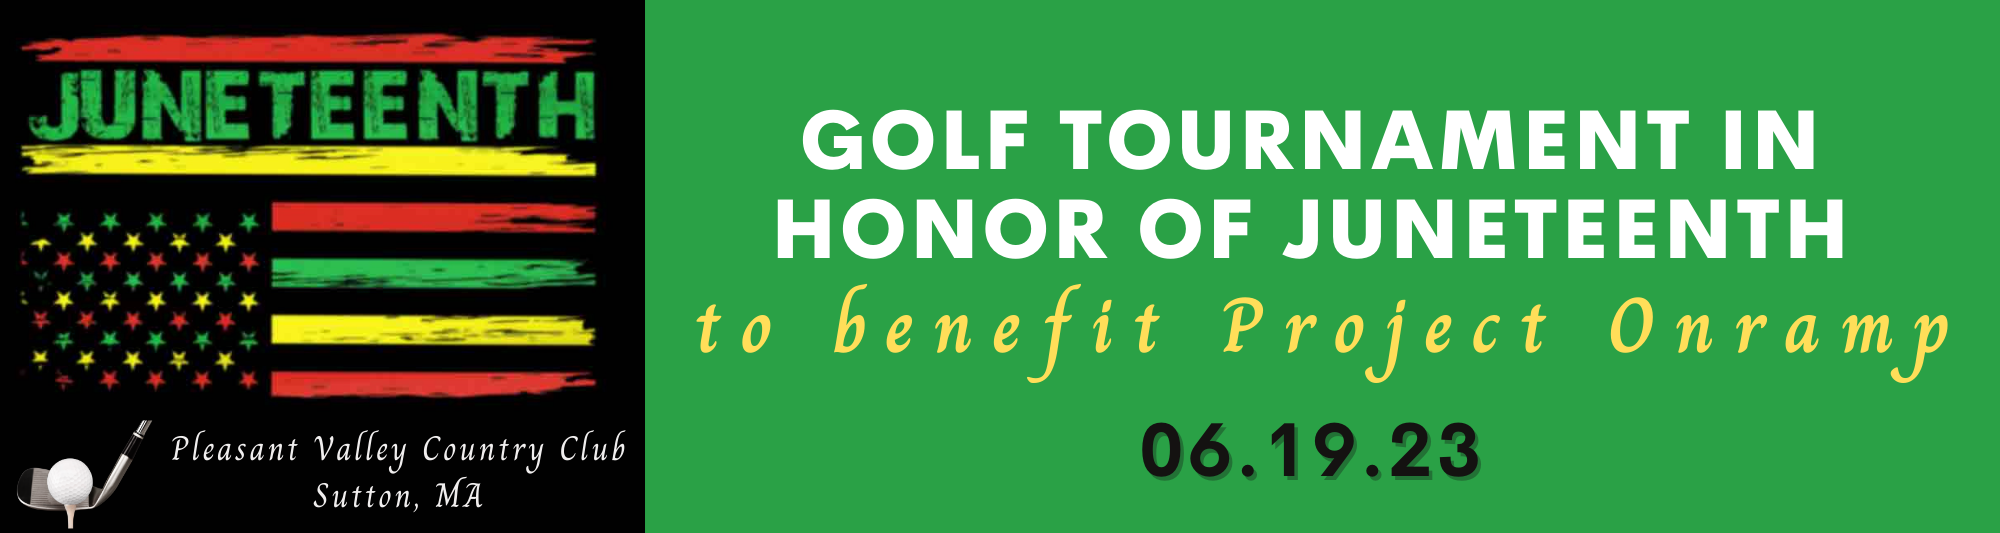 WIP/EDEI Juneteenth Golf Tournament to Benefit Project Onramp